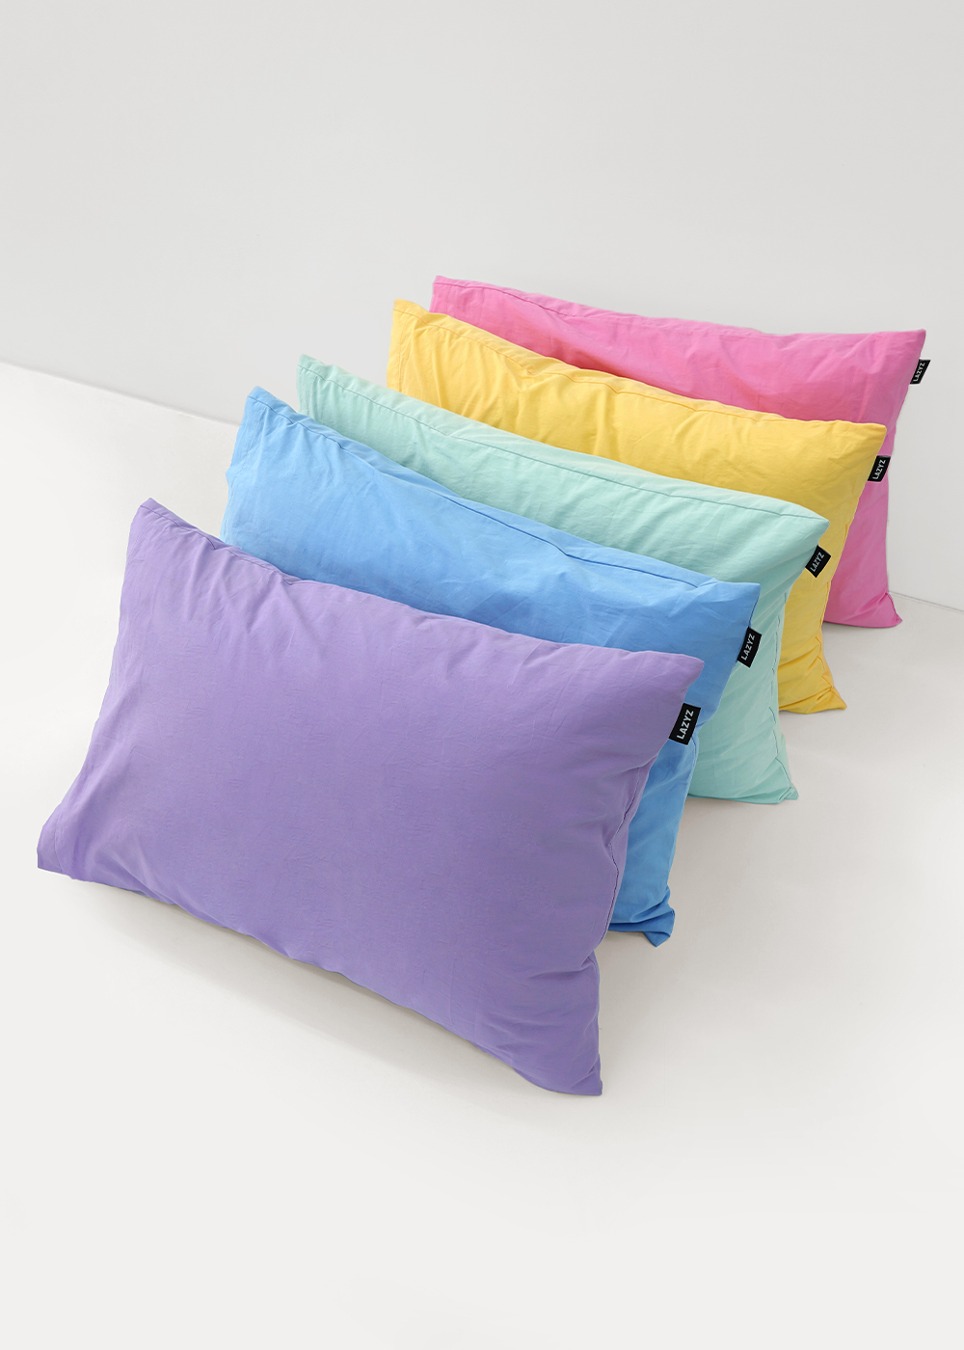 Lazyz Classic Home Solid Pillow Cover